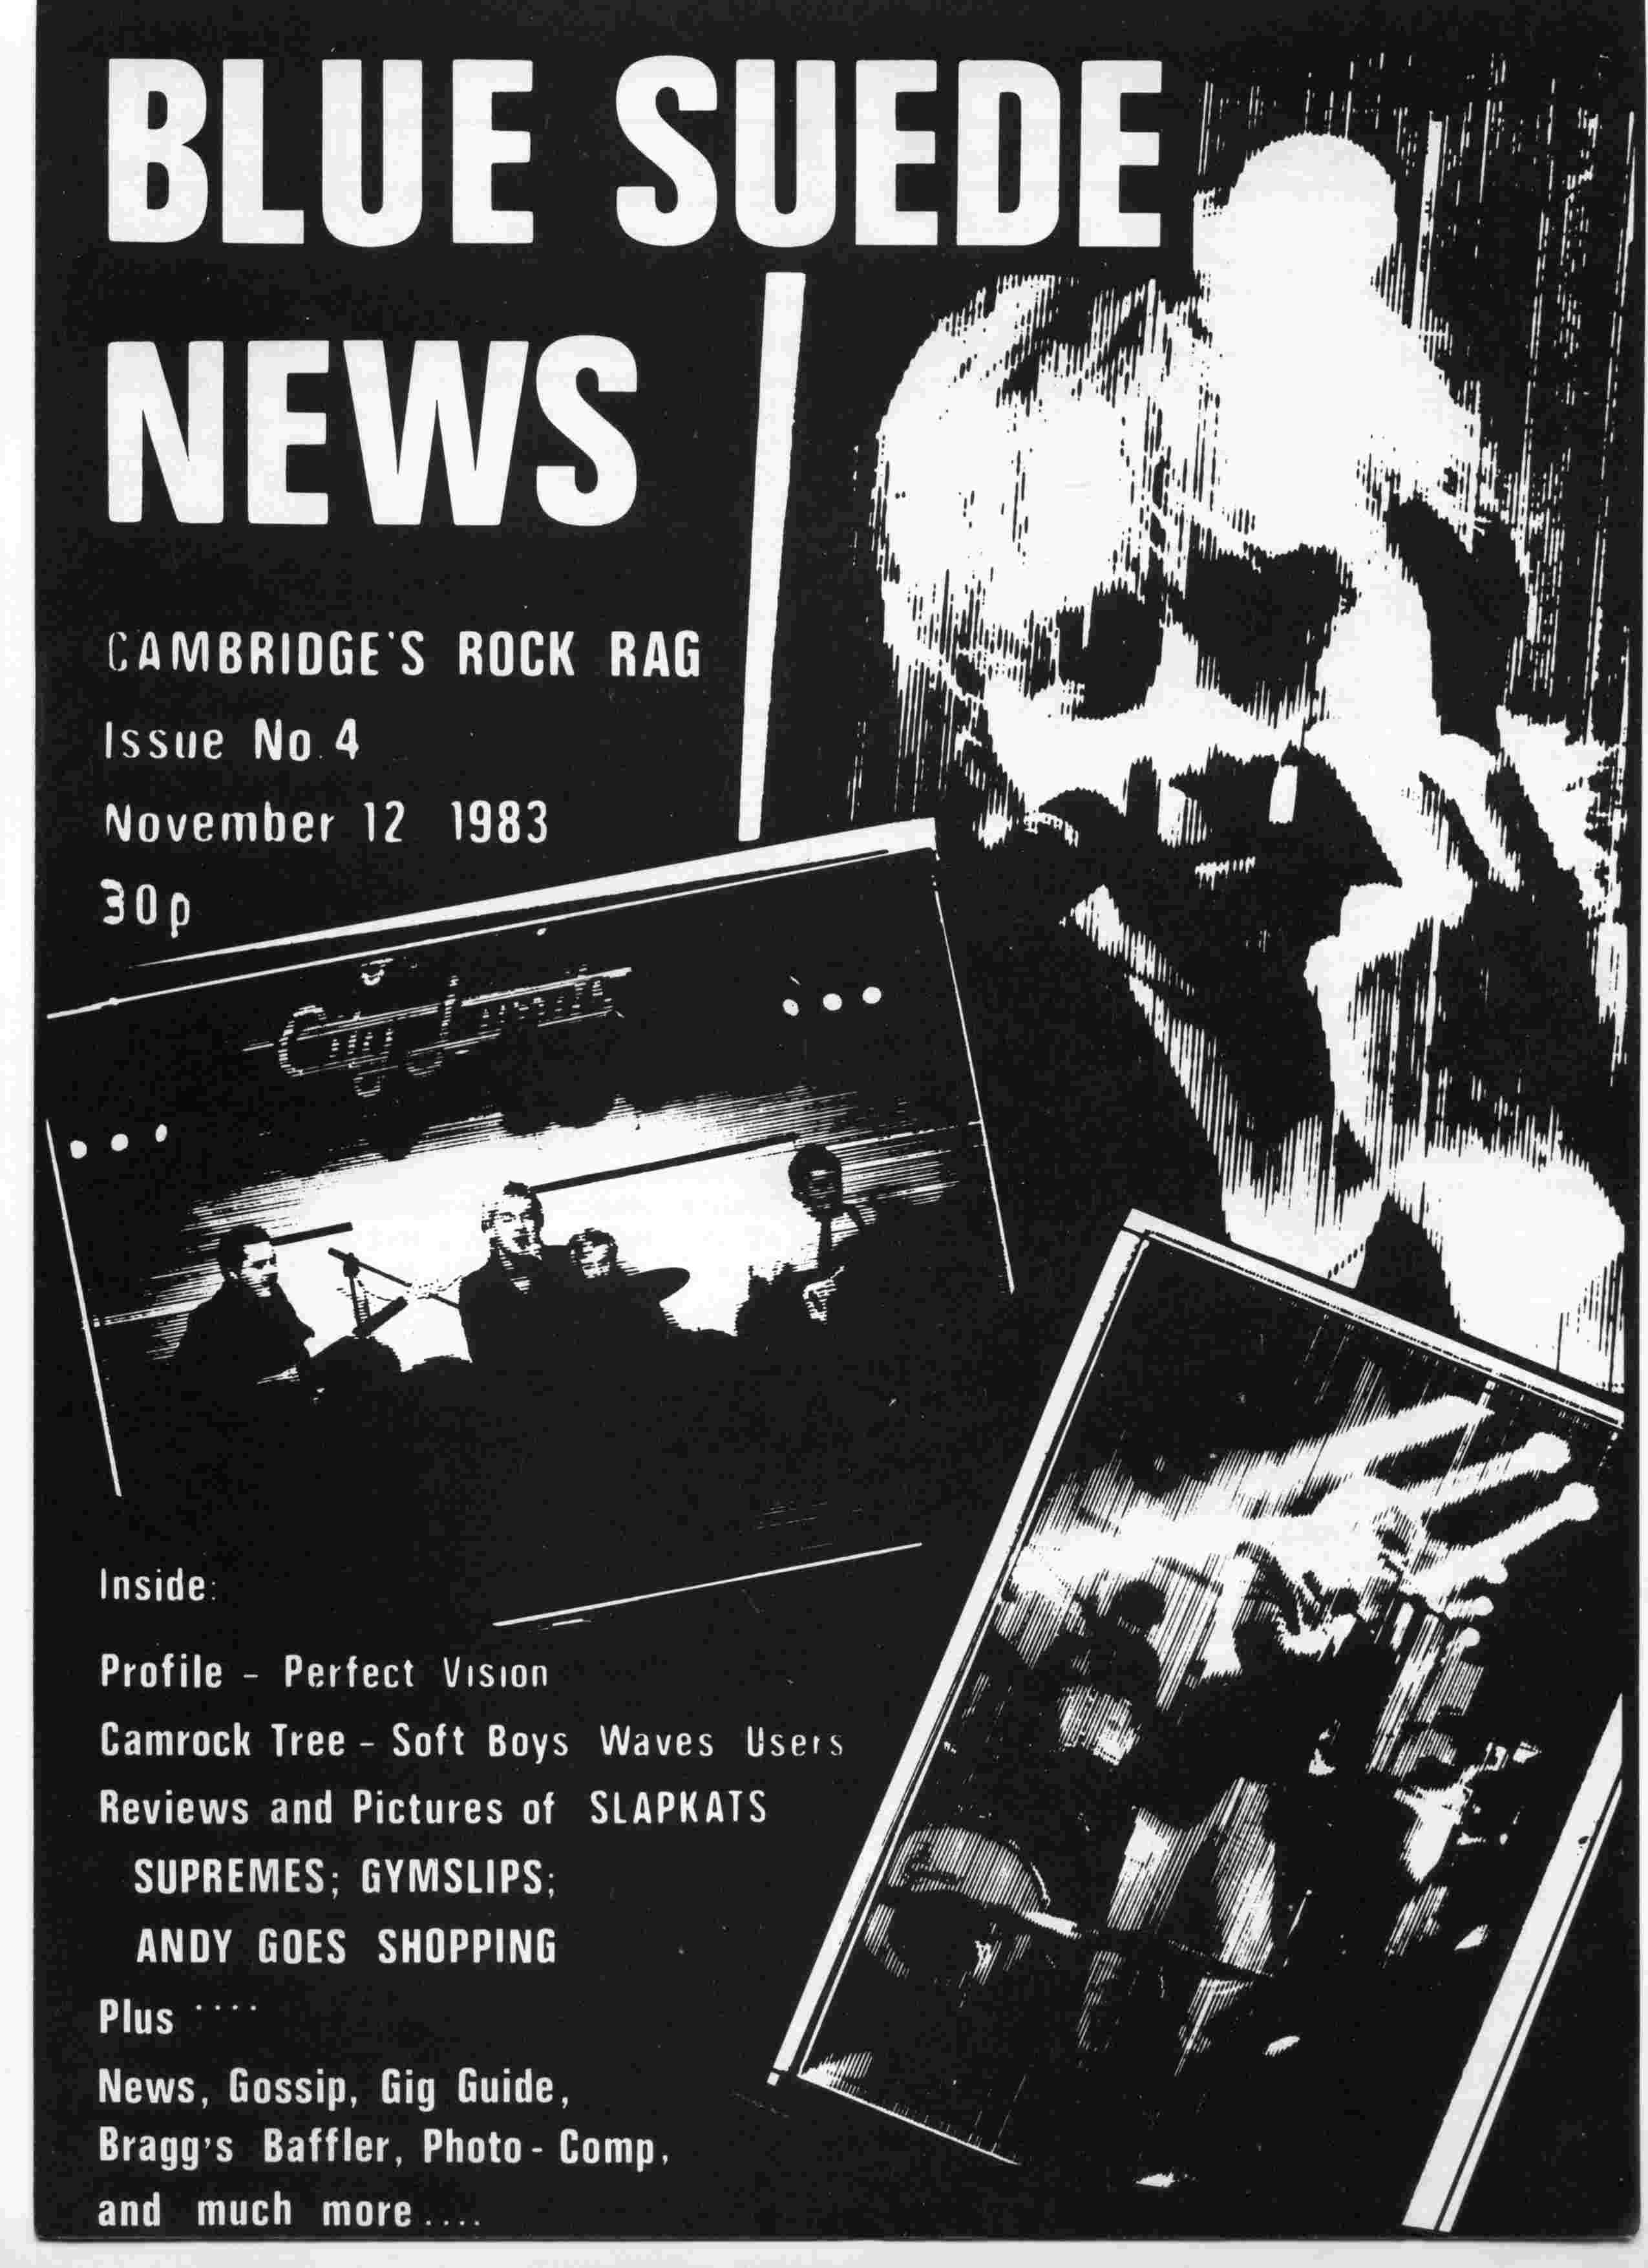 Cover of Blue Suede News Issue 4